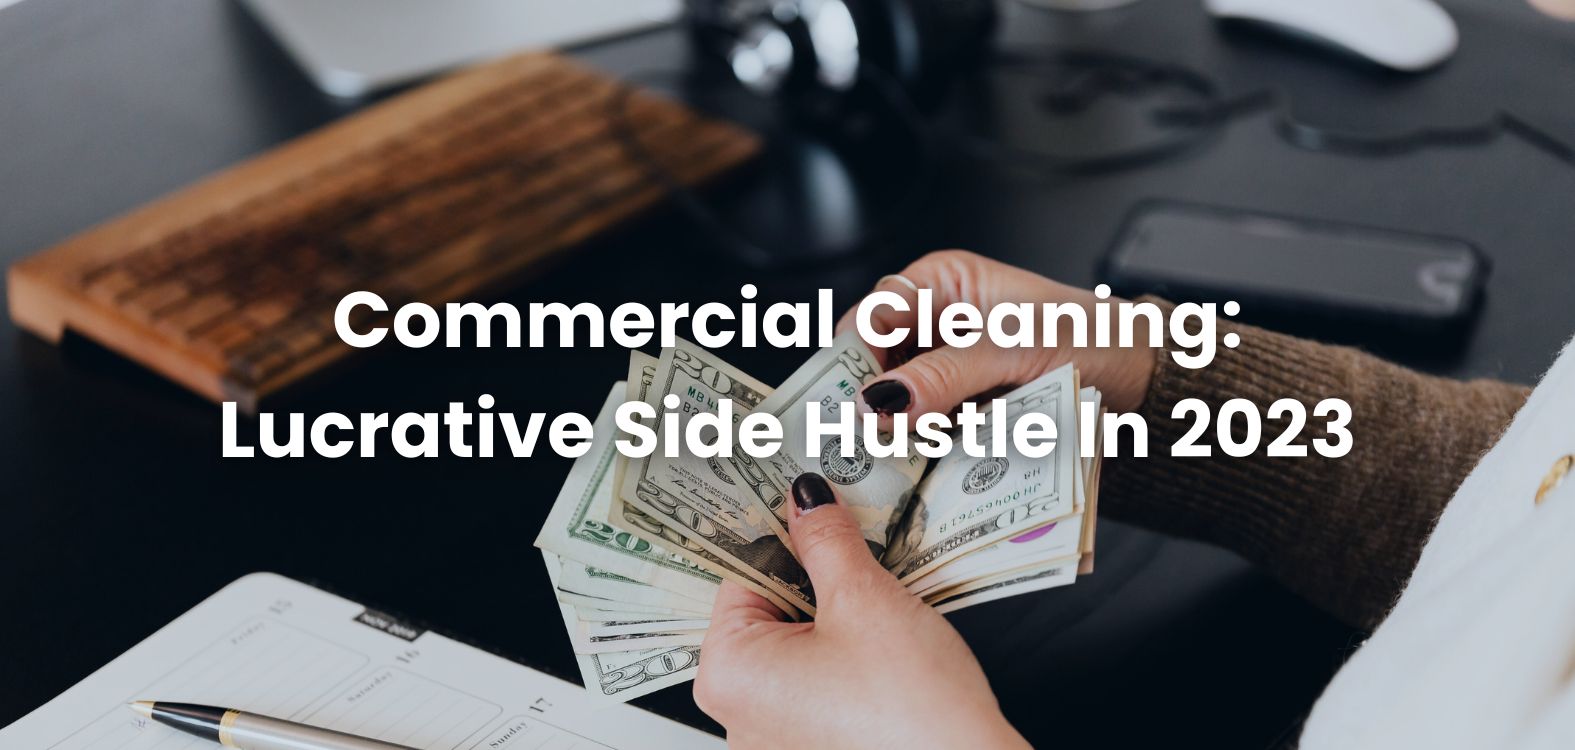 Commercial Cleaning: Lucrative Side Hustle In 2023